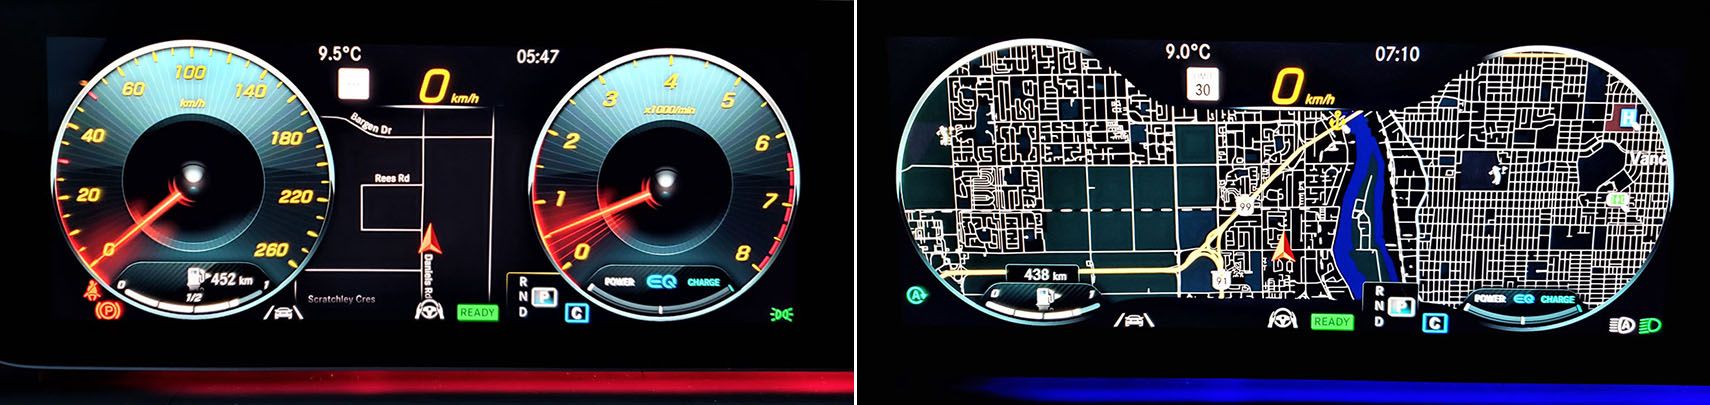 The push of a button allows the multi-information display to almost completely take over the primary gauges.